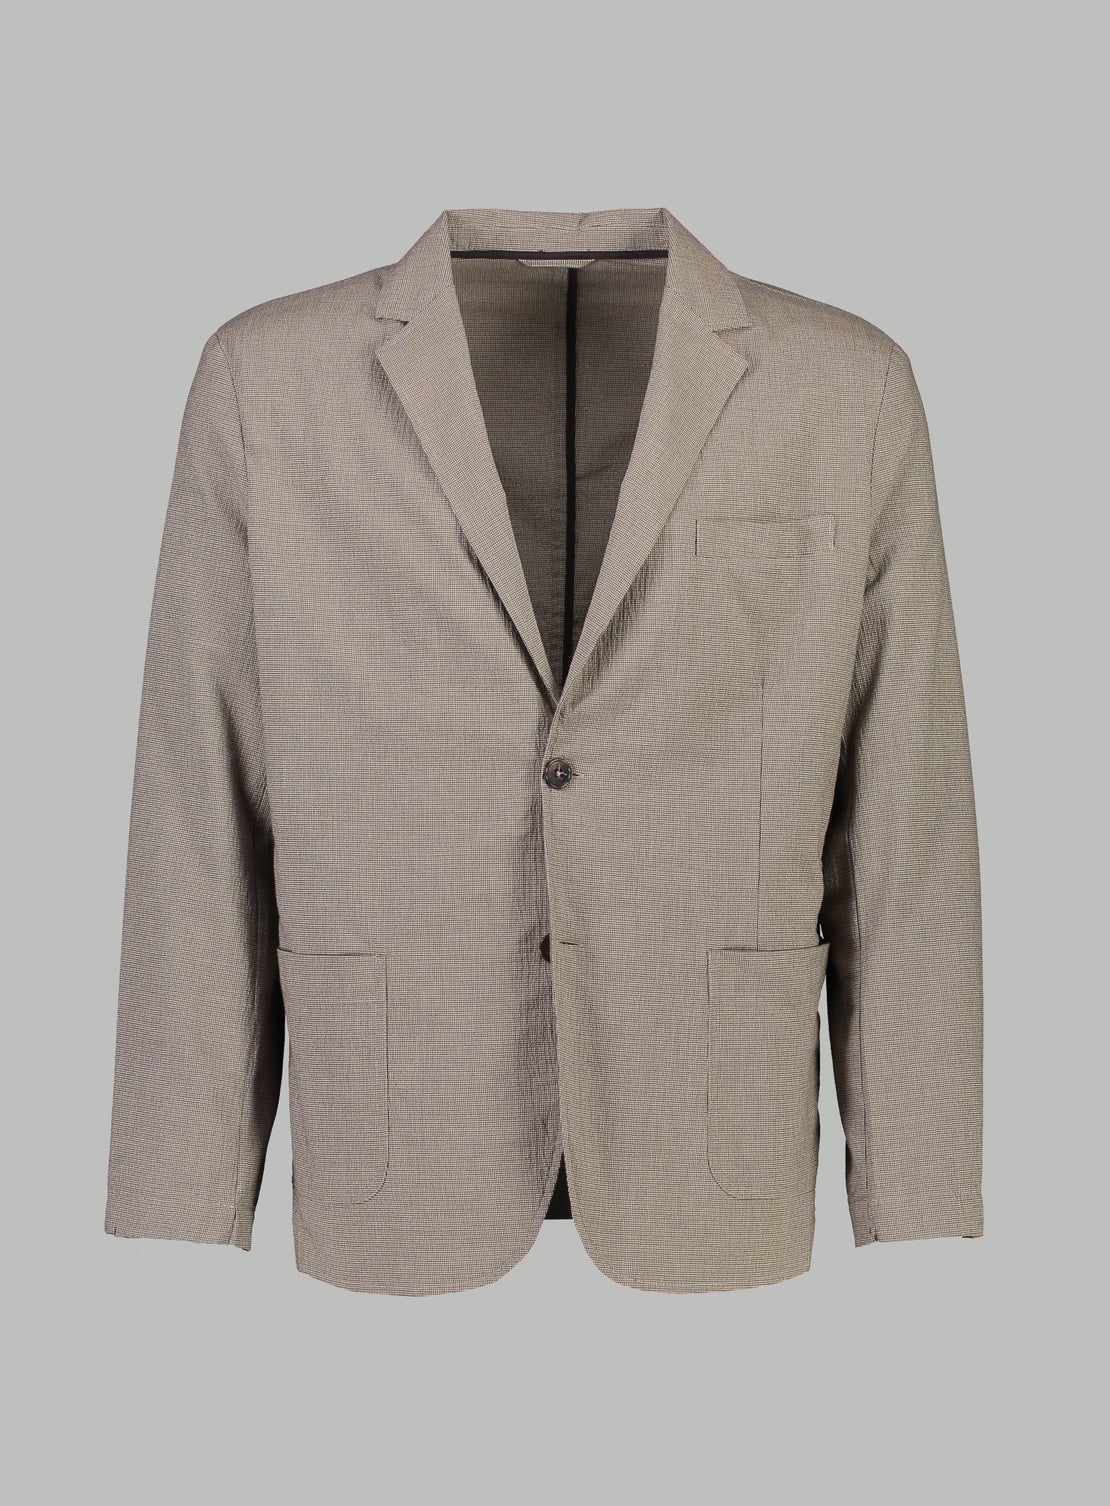 Foster Tan Houndstooth Jacket